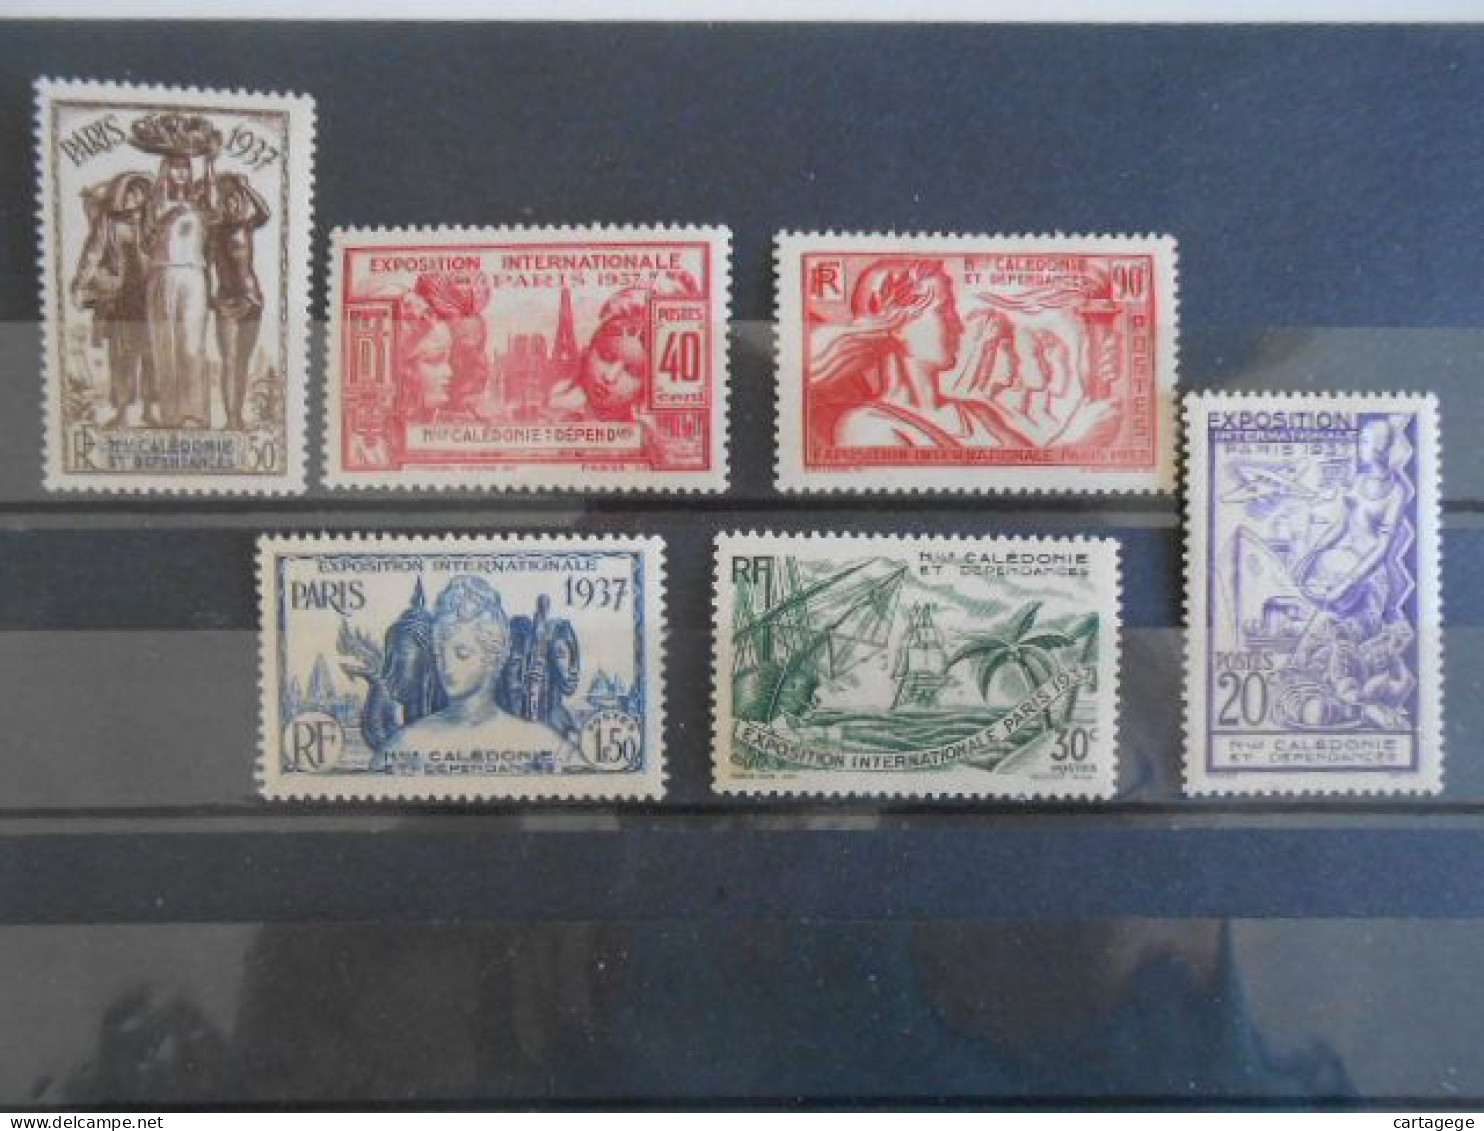 NLE-CALEDONIE YT 166/171 EXPOSITION COLONIALE* - Unused Stamps